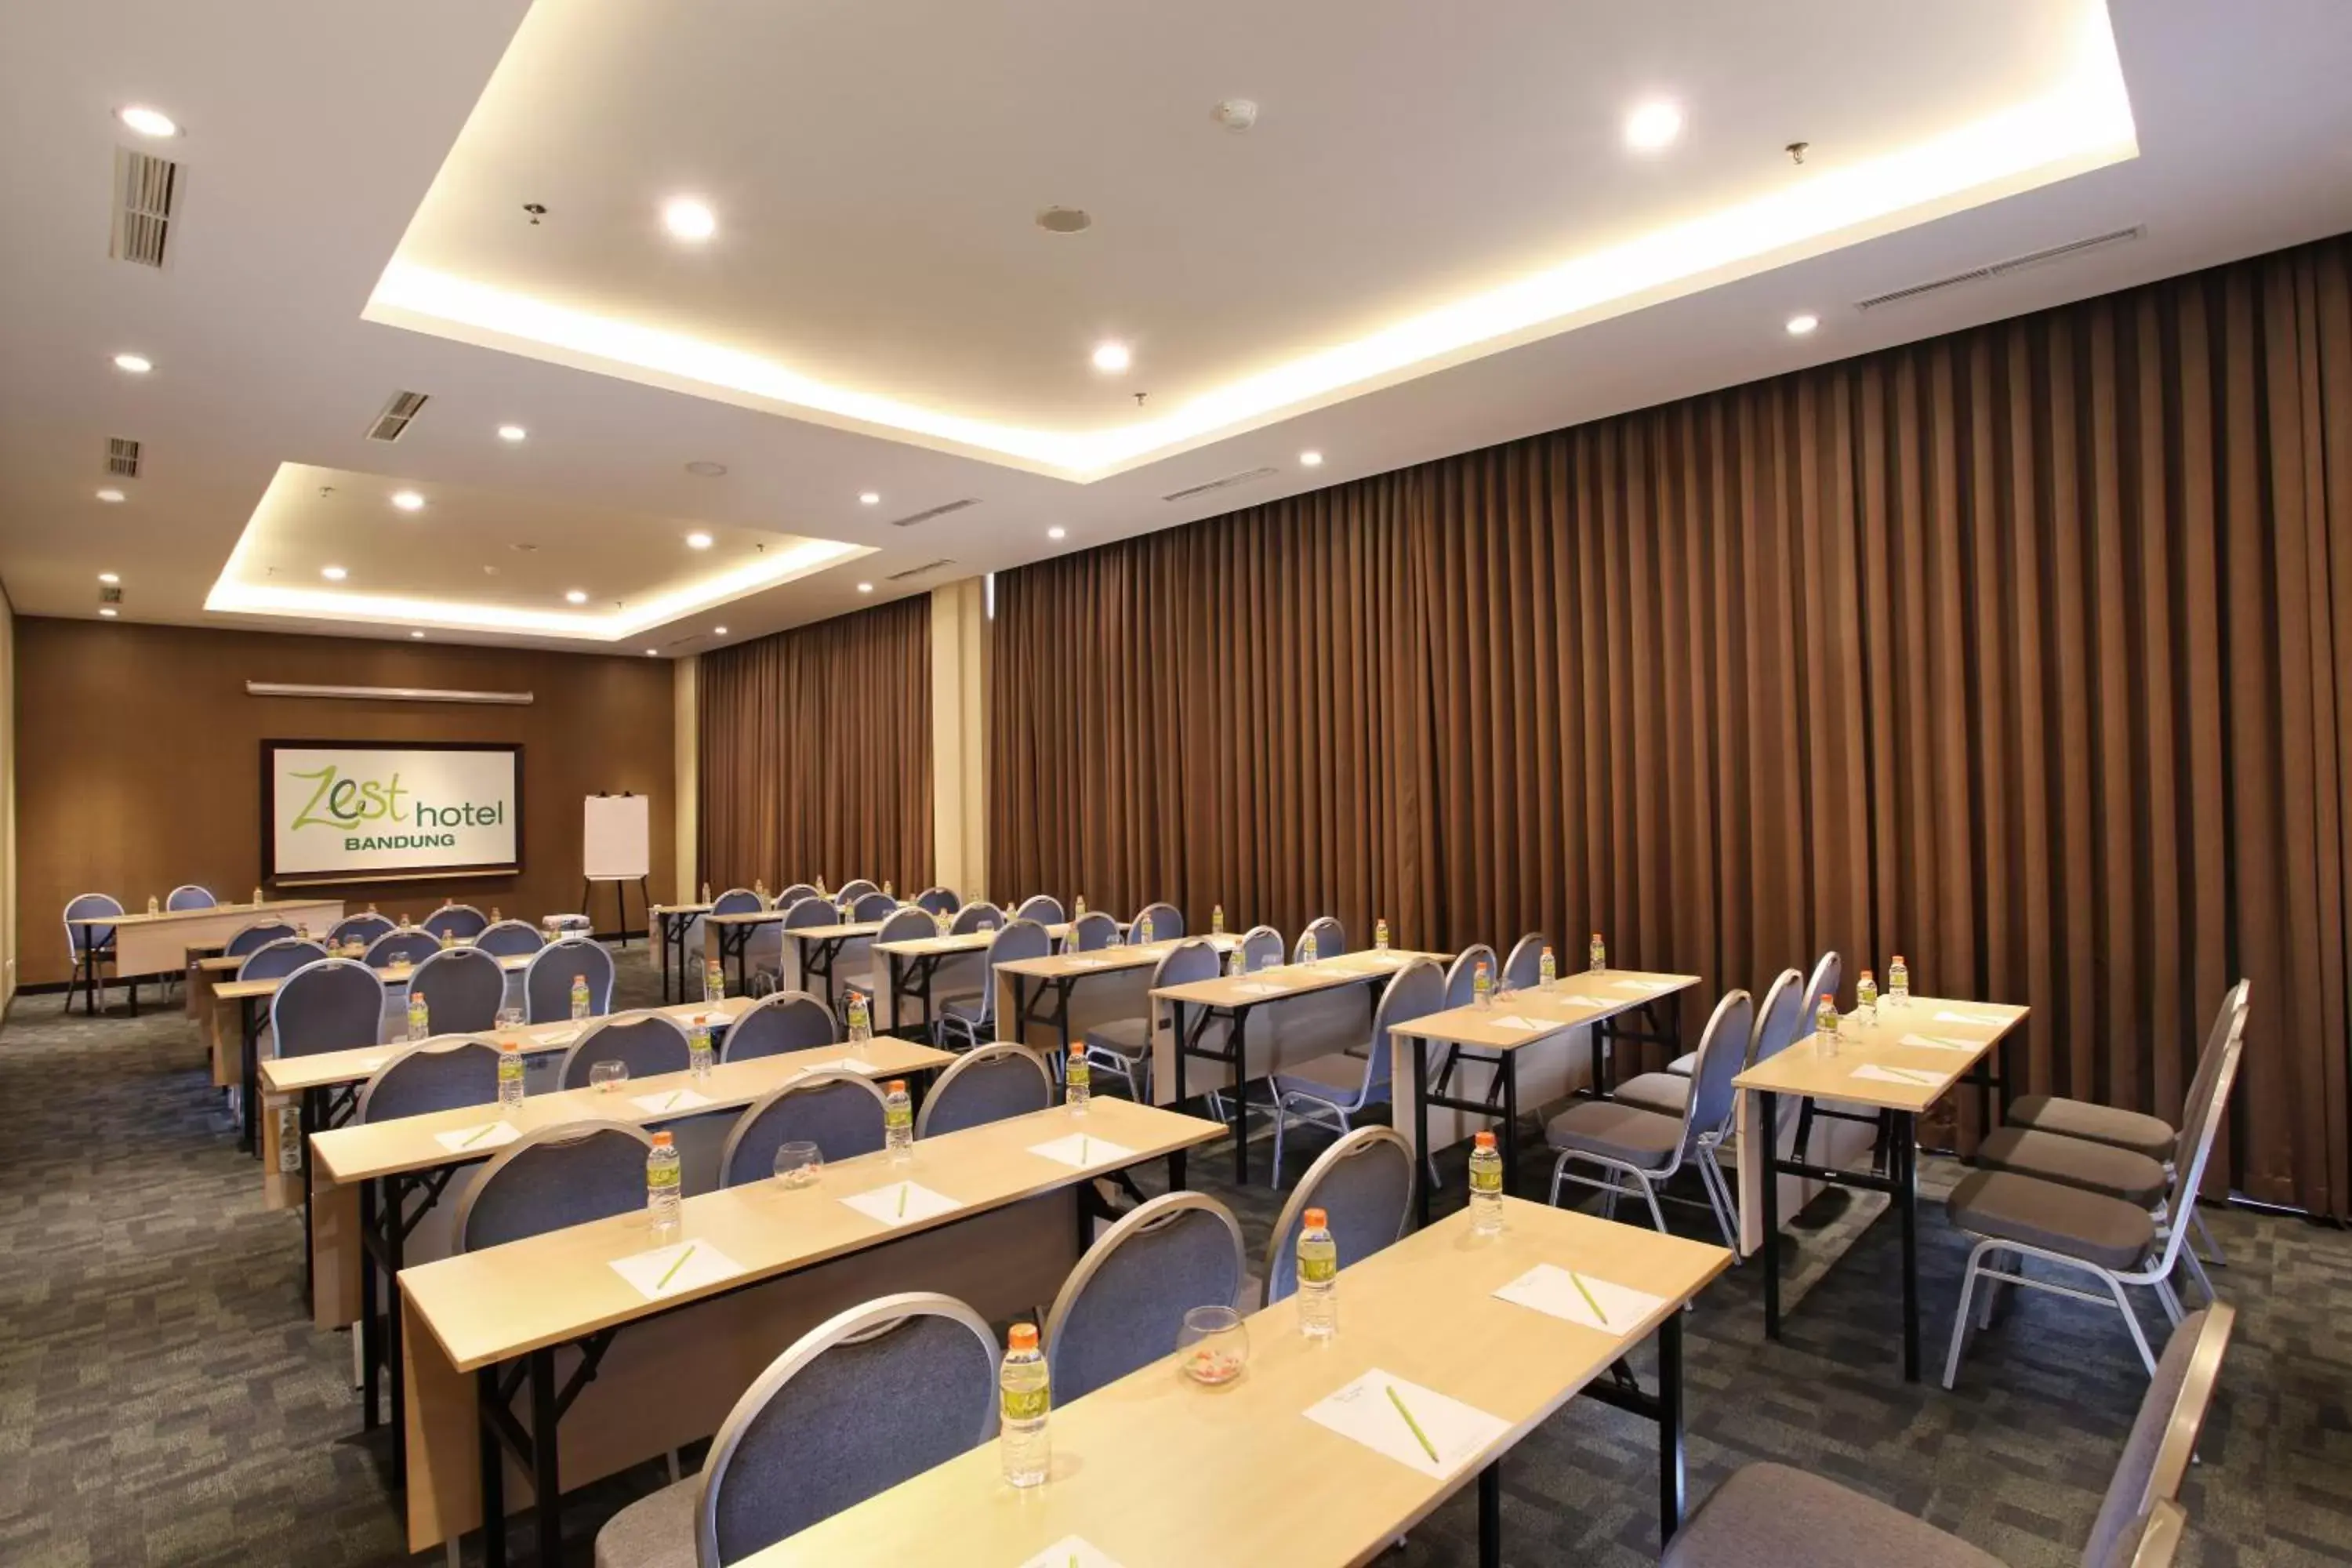 Banquet/Function facilities, Business Area/Conference Room in Zest Hotel Sukajadi Bandung